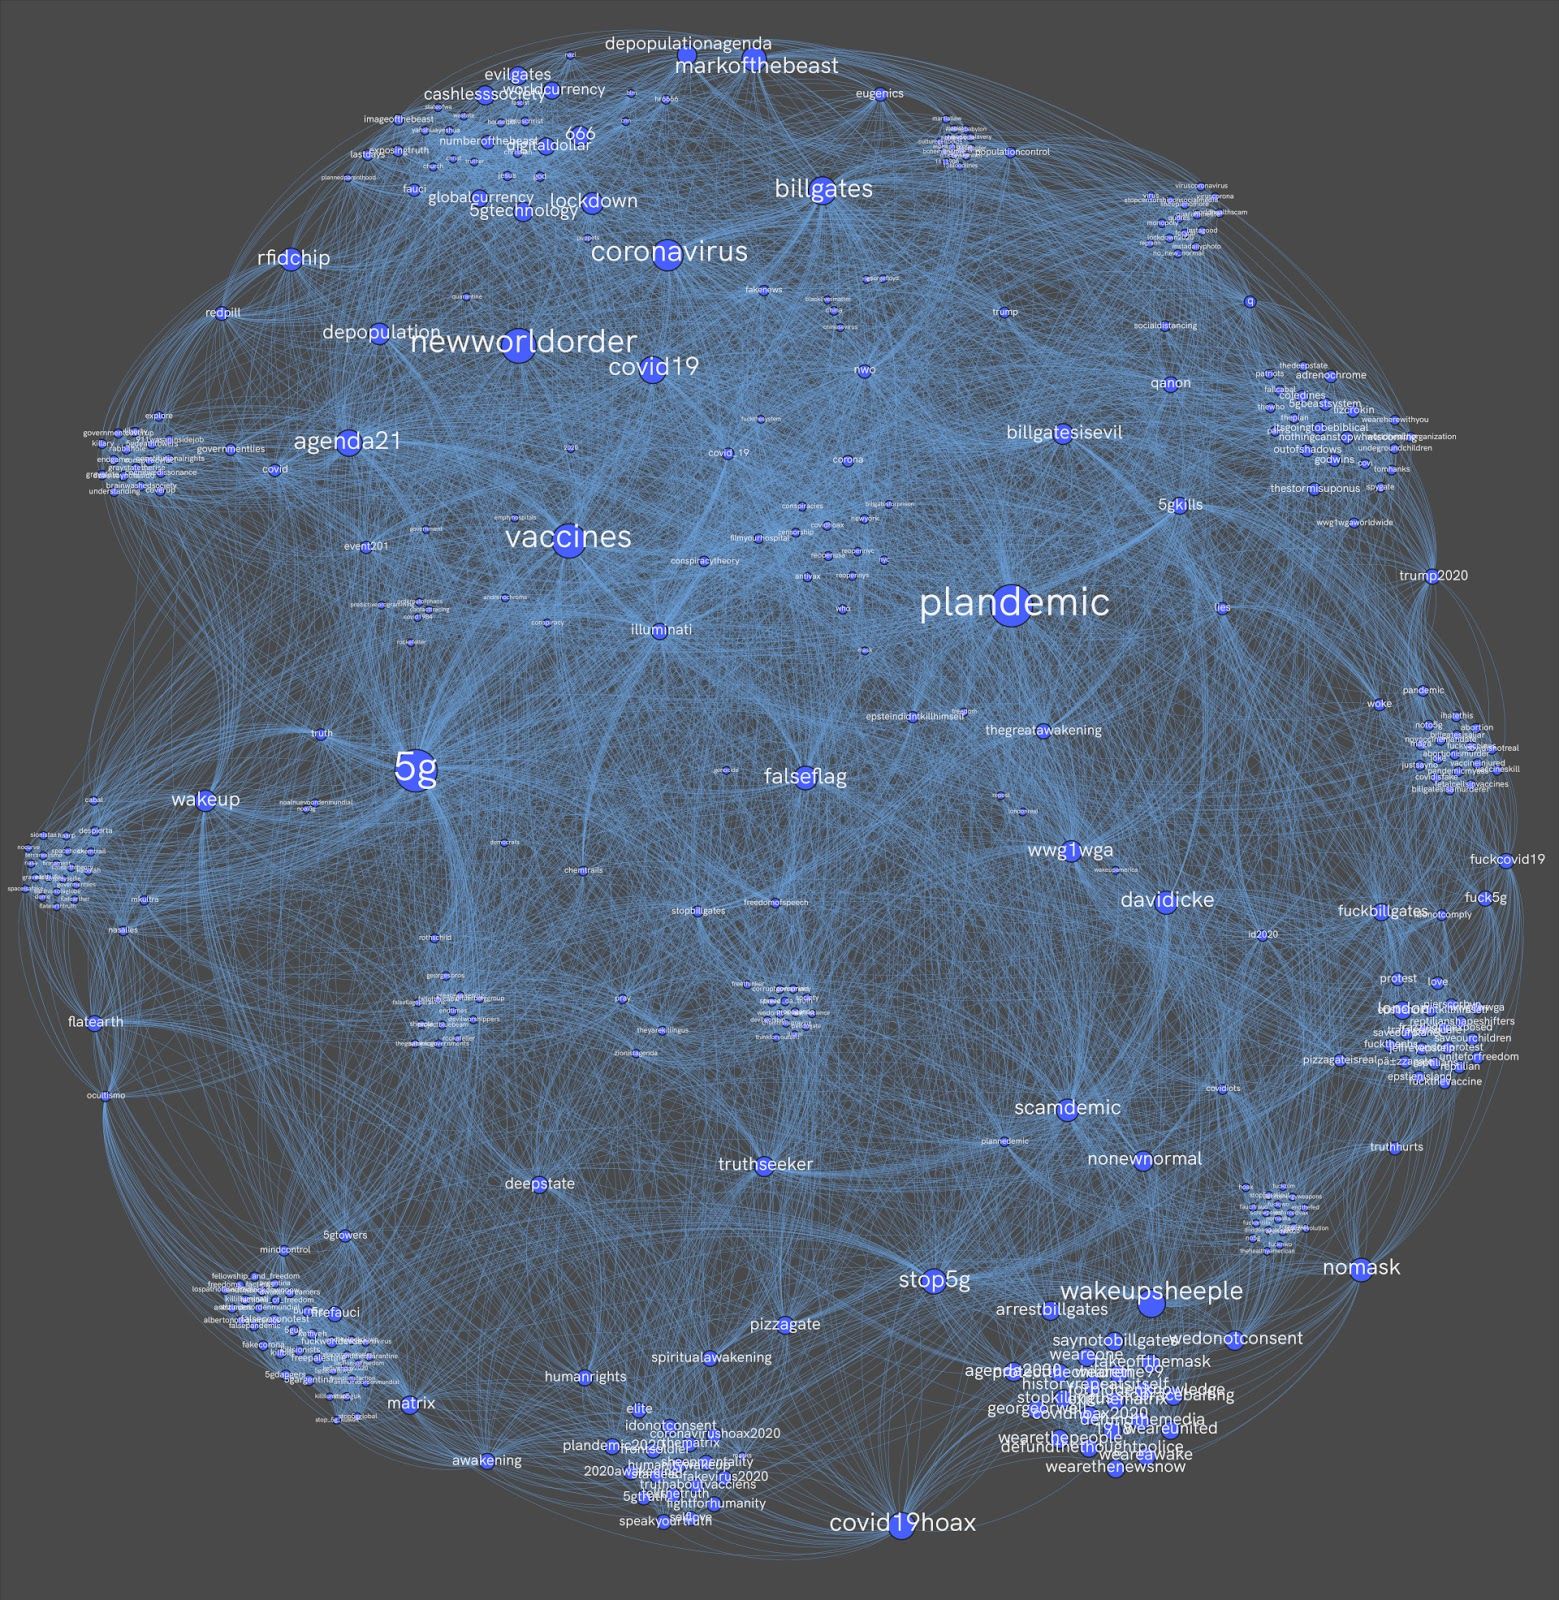 Figure 1: Co-hashtag network visualization of top 200 most engaged posts on Instagram